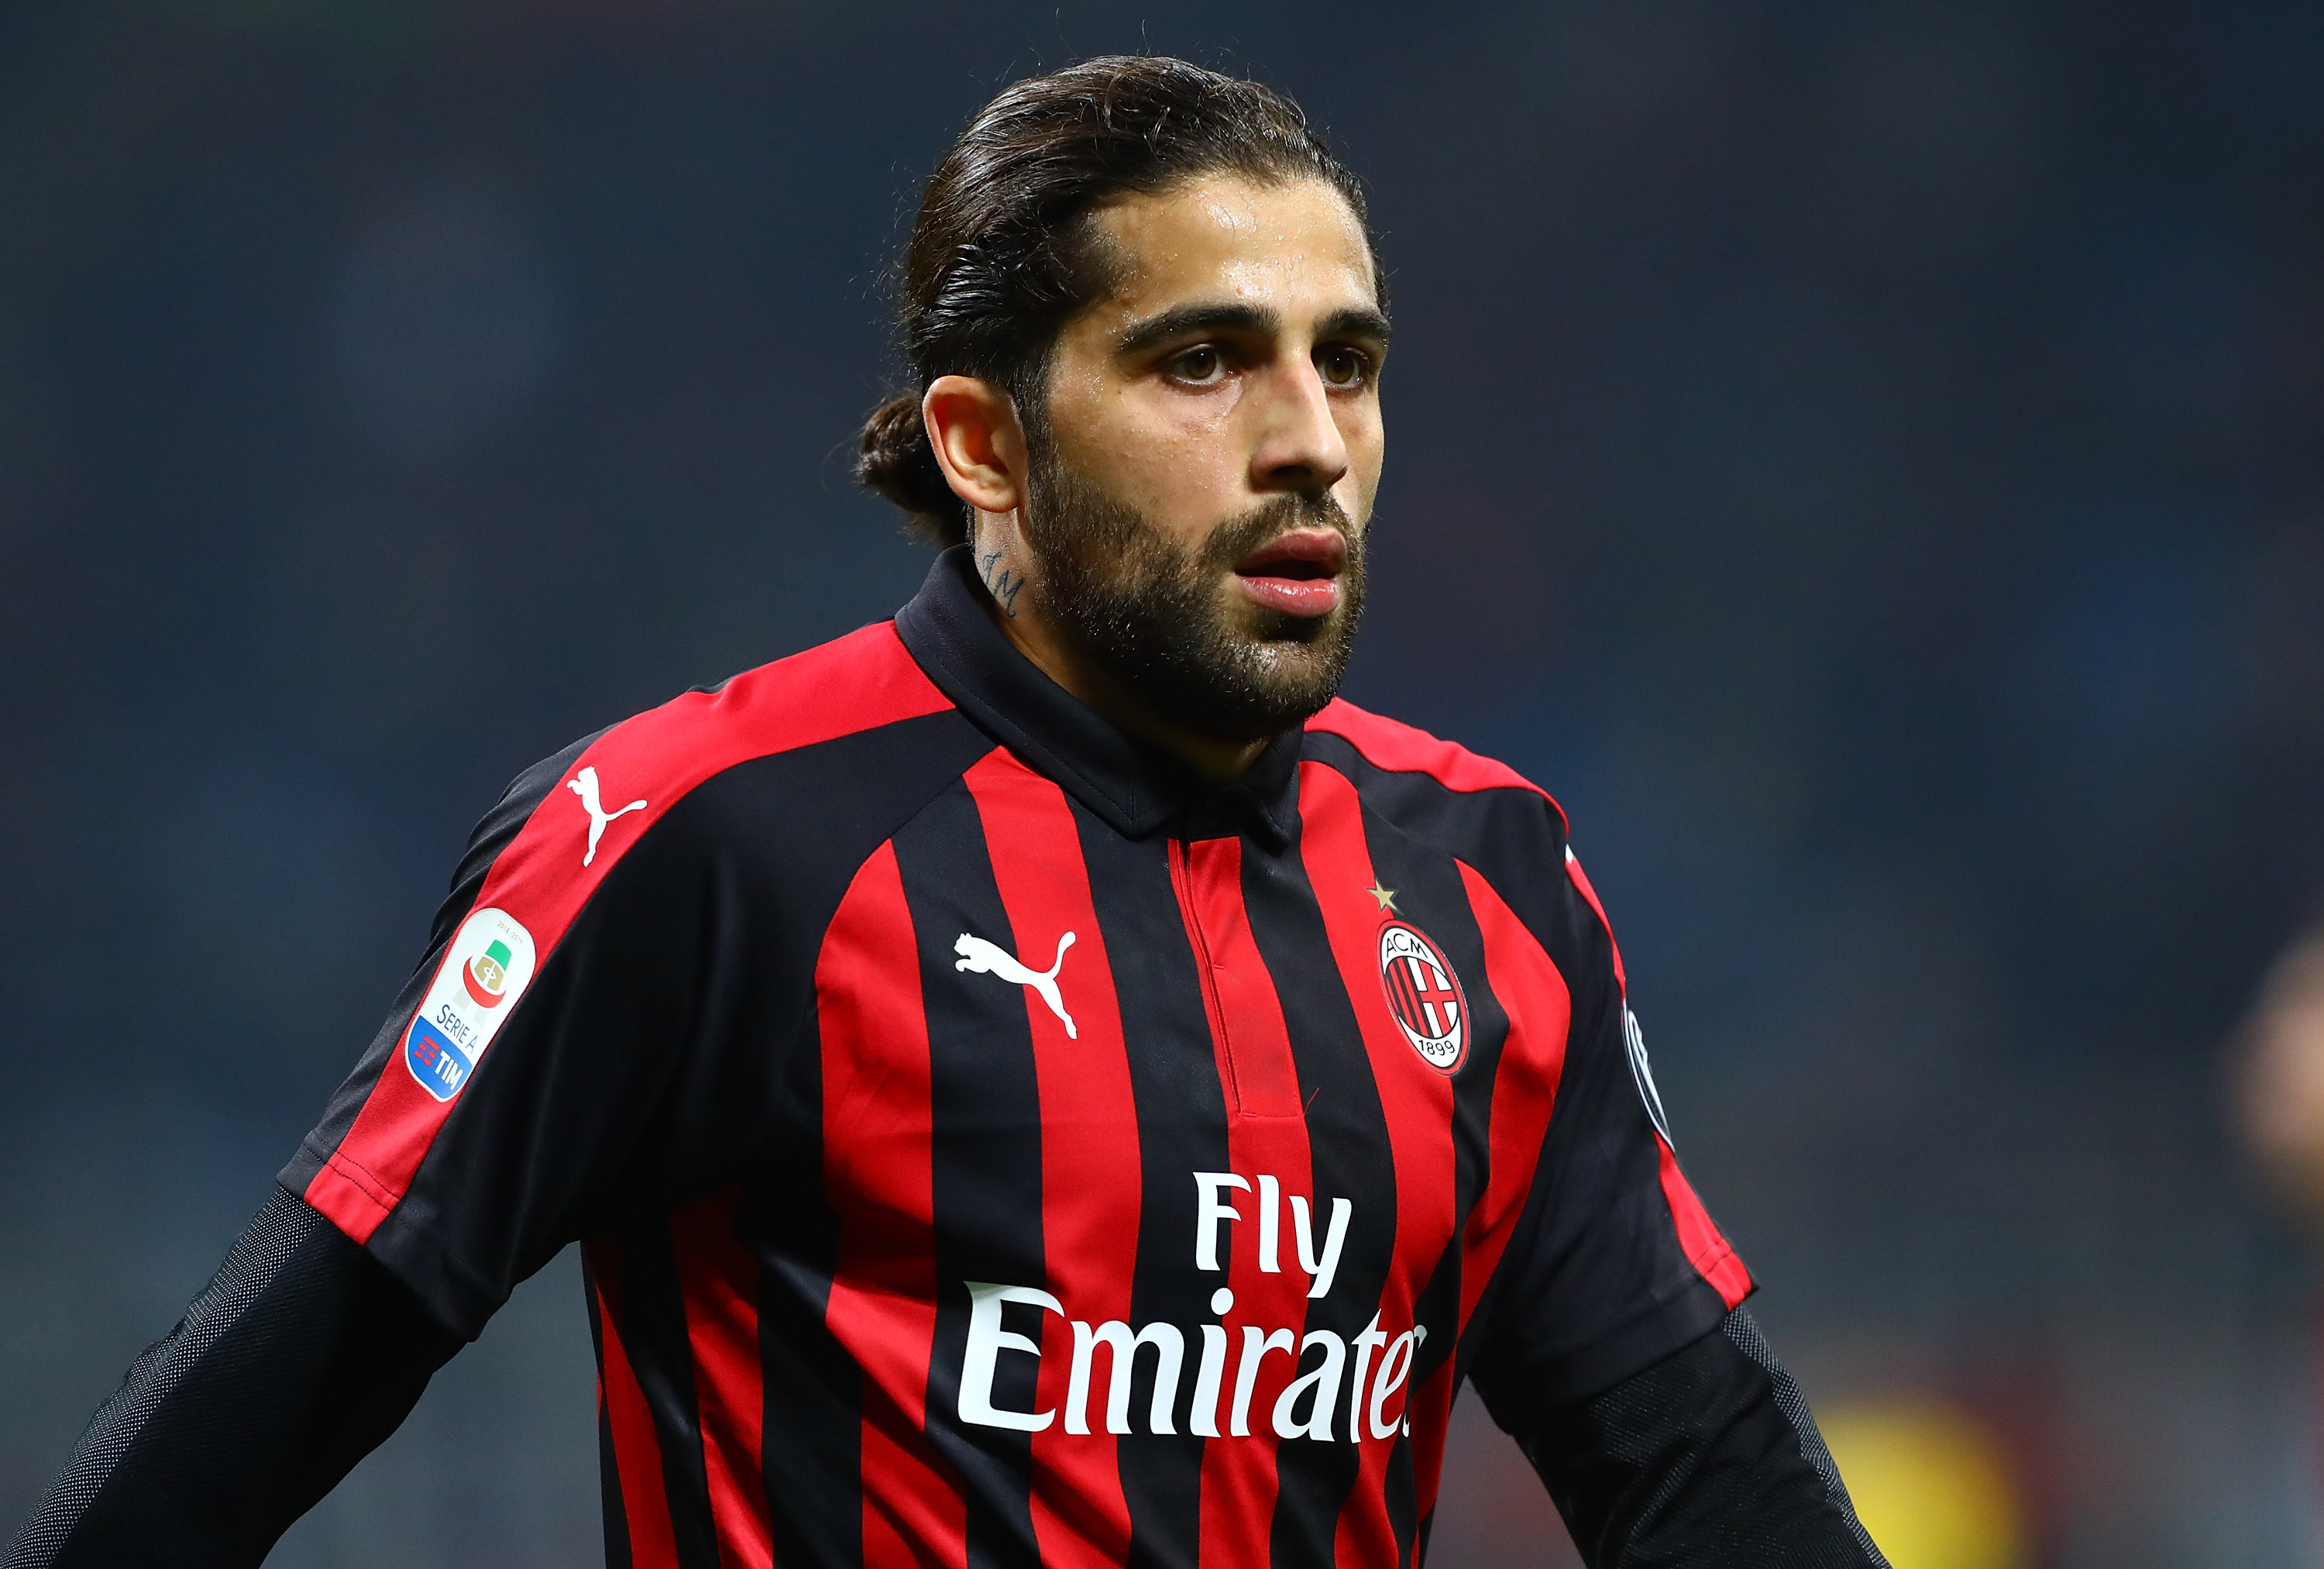 MILAN, ITALY - DECEMBER 29: Ricardo Rodriguez of AC Milan looks on during the Serie A match between AC Milan and SPAL at Stadio Giuseppe Meazza on December 29, 2018 in Milan, Italy. (Photo by Marco Luzzani/Getty Images)